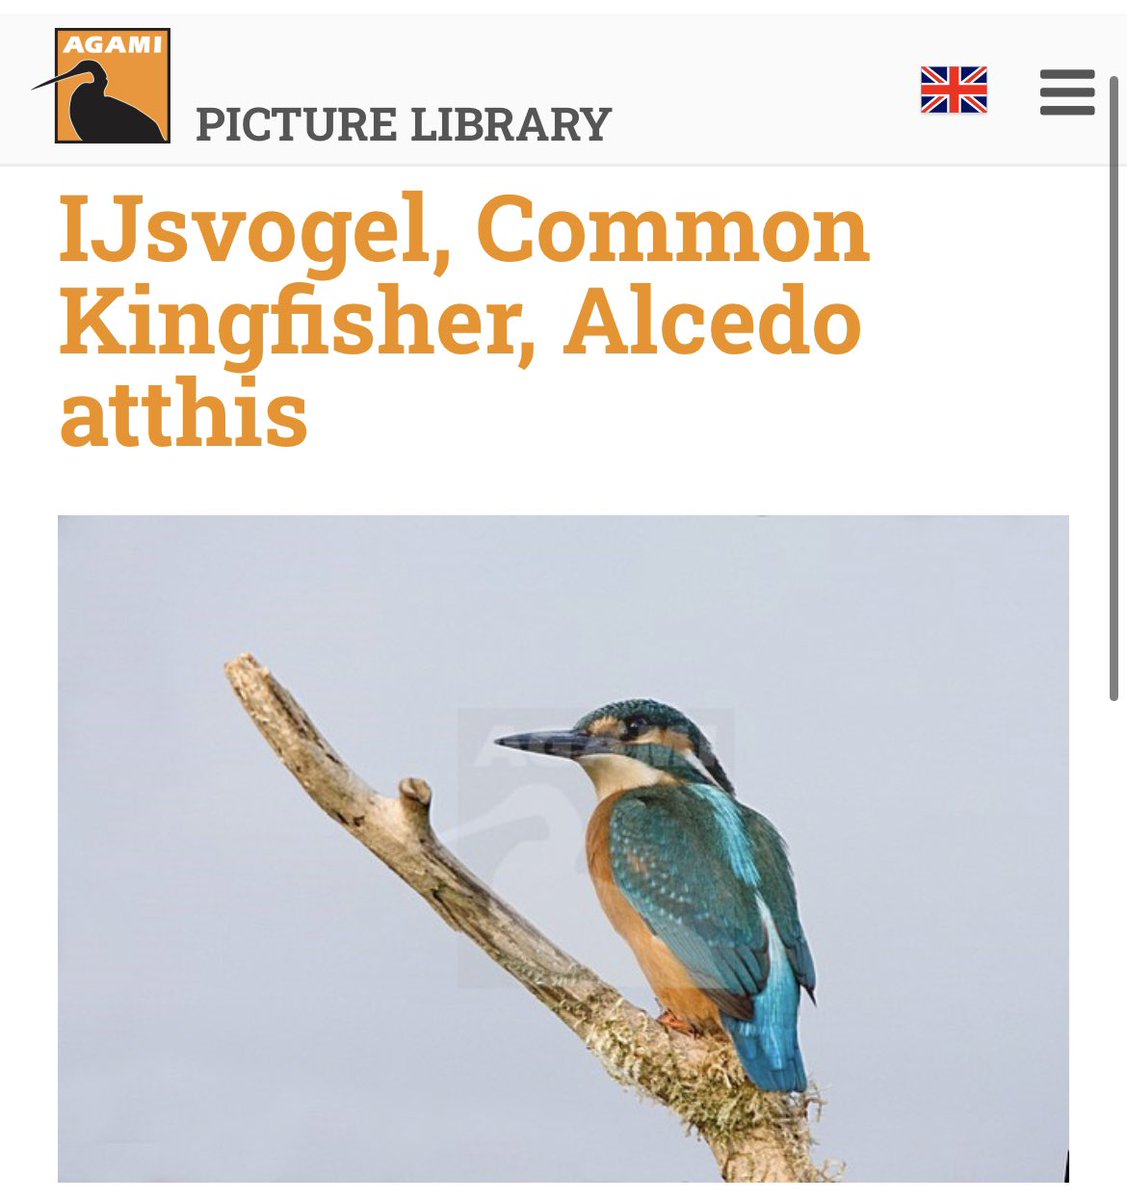 +1 for the #LocalBigYear in/around #katwijk 🇳🇱

New bird
201. Common Kingfisher

Heard it while looking for migrants in a local forest patch. 

#lowcarbonbirding #vogelbescherming #birdsseenin2022 #groenejaarlijst 

Images from @AgamiPhoto archives: agami.nl/search.pp?mult…+